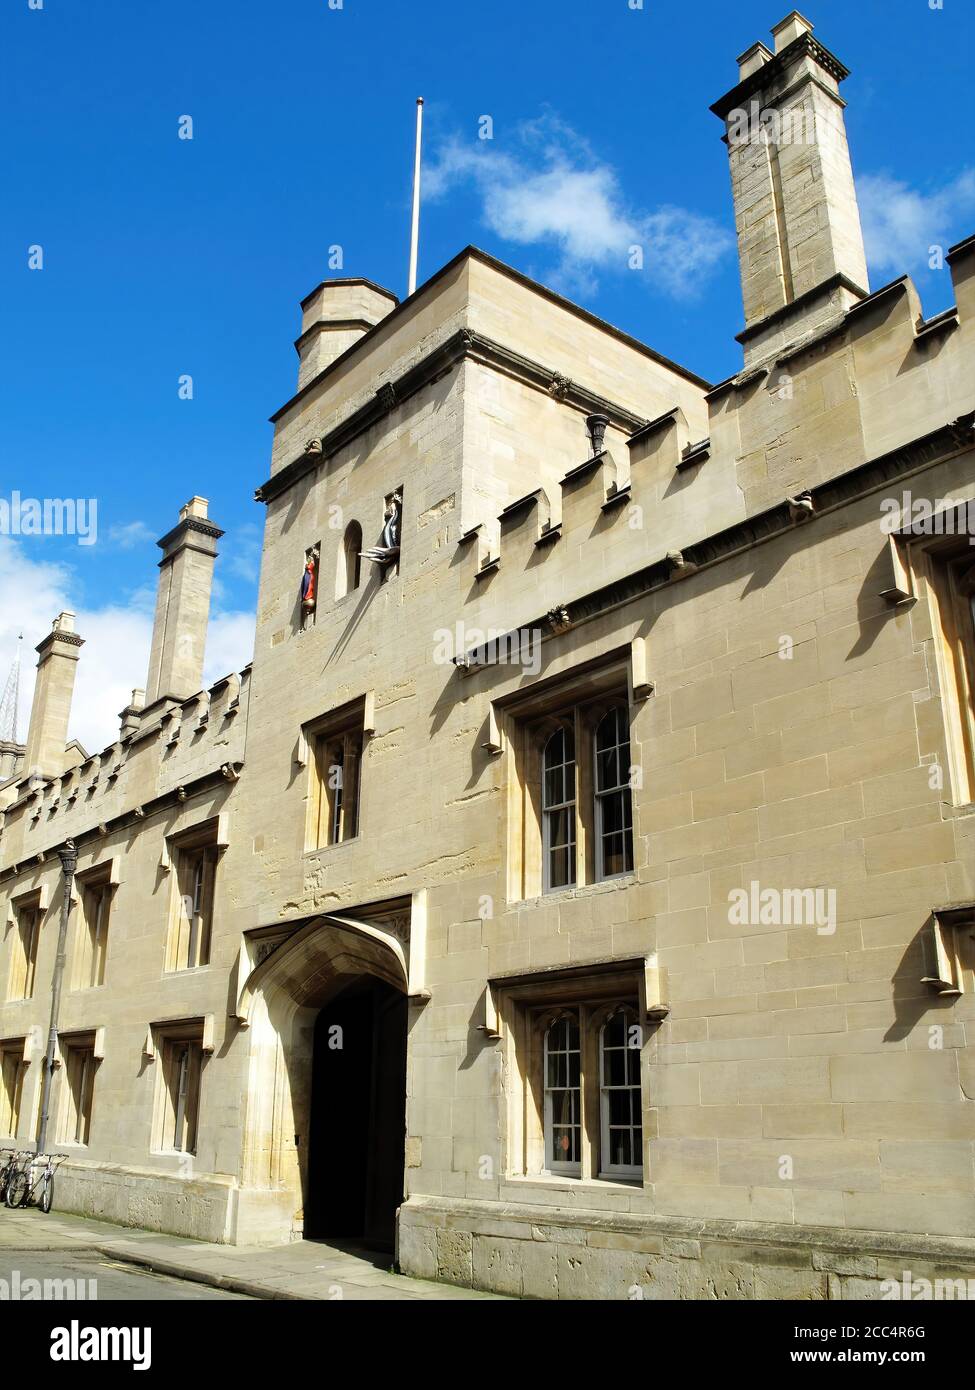 Lincoln College Oxford University Oxfordshire England UK  founded in 1427 is the ninth oldest oldest of the colleges and a popular tourism travel dest Stock Photo